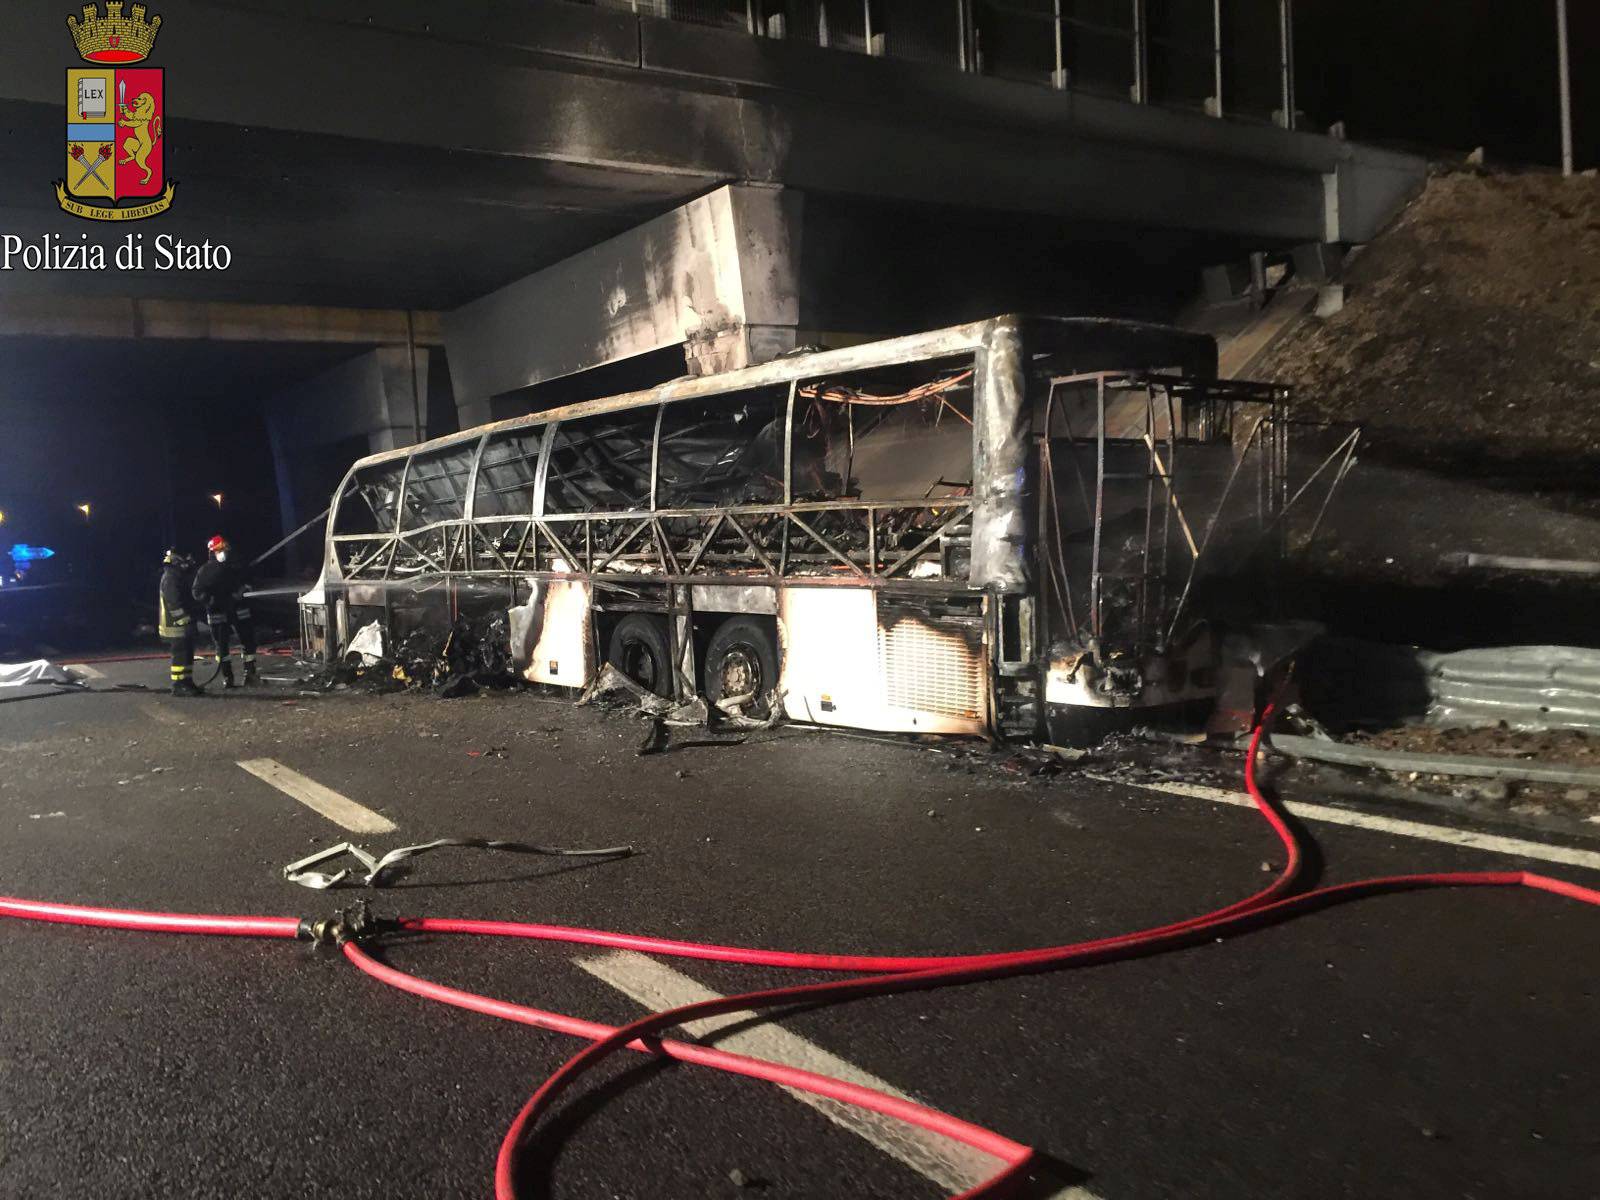 A charred bus, which was carrying Hungarian students, is seen on a side of a highway, near Verona